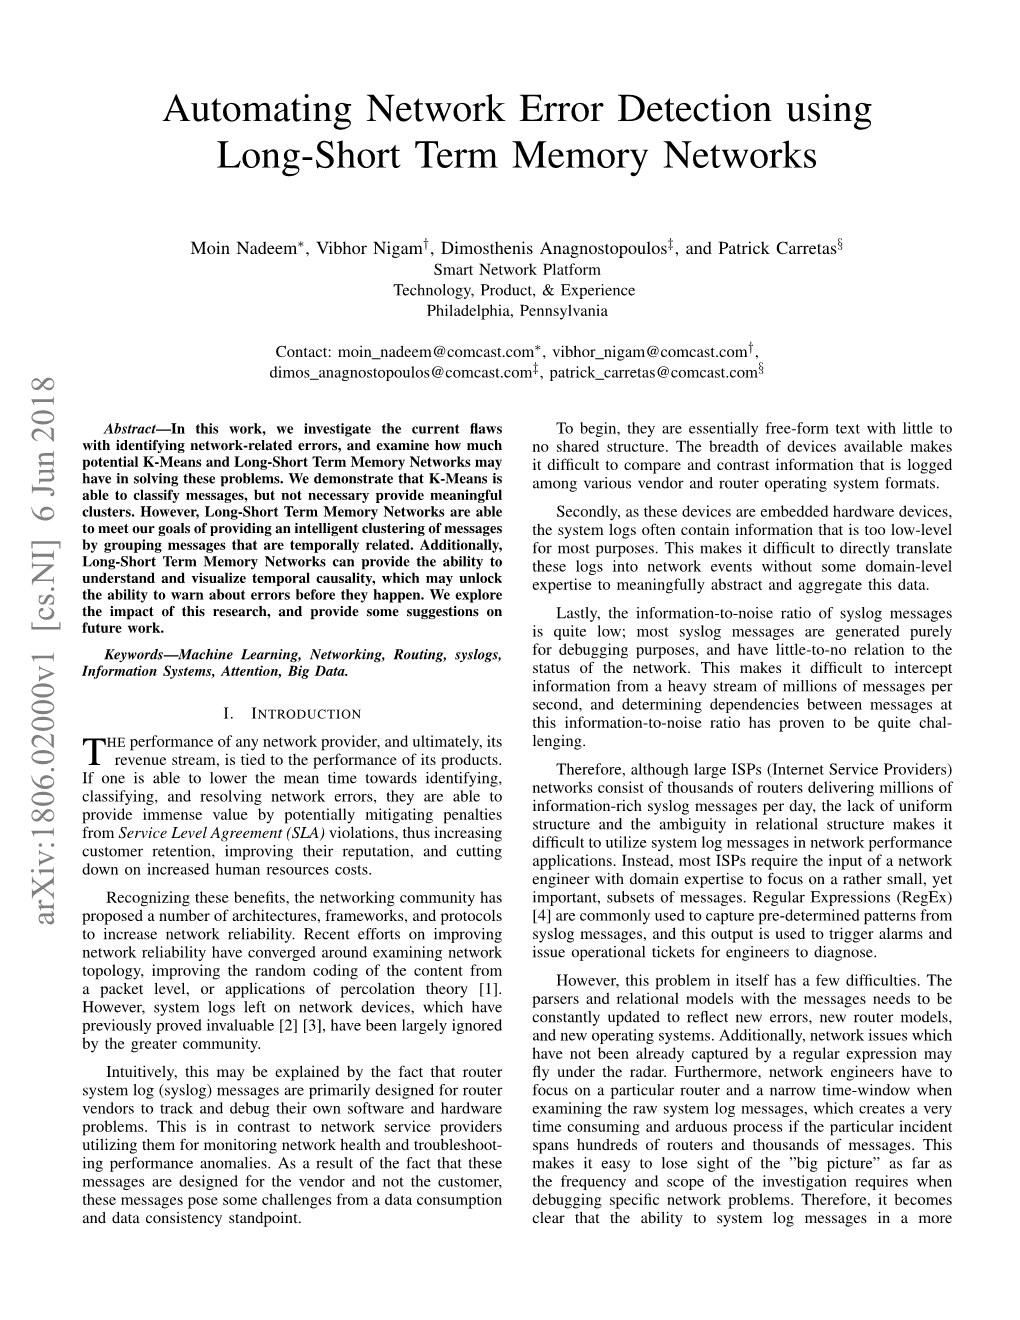 Automating Network Error Detection Using Long-Short Term Memory Networks